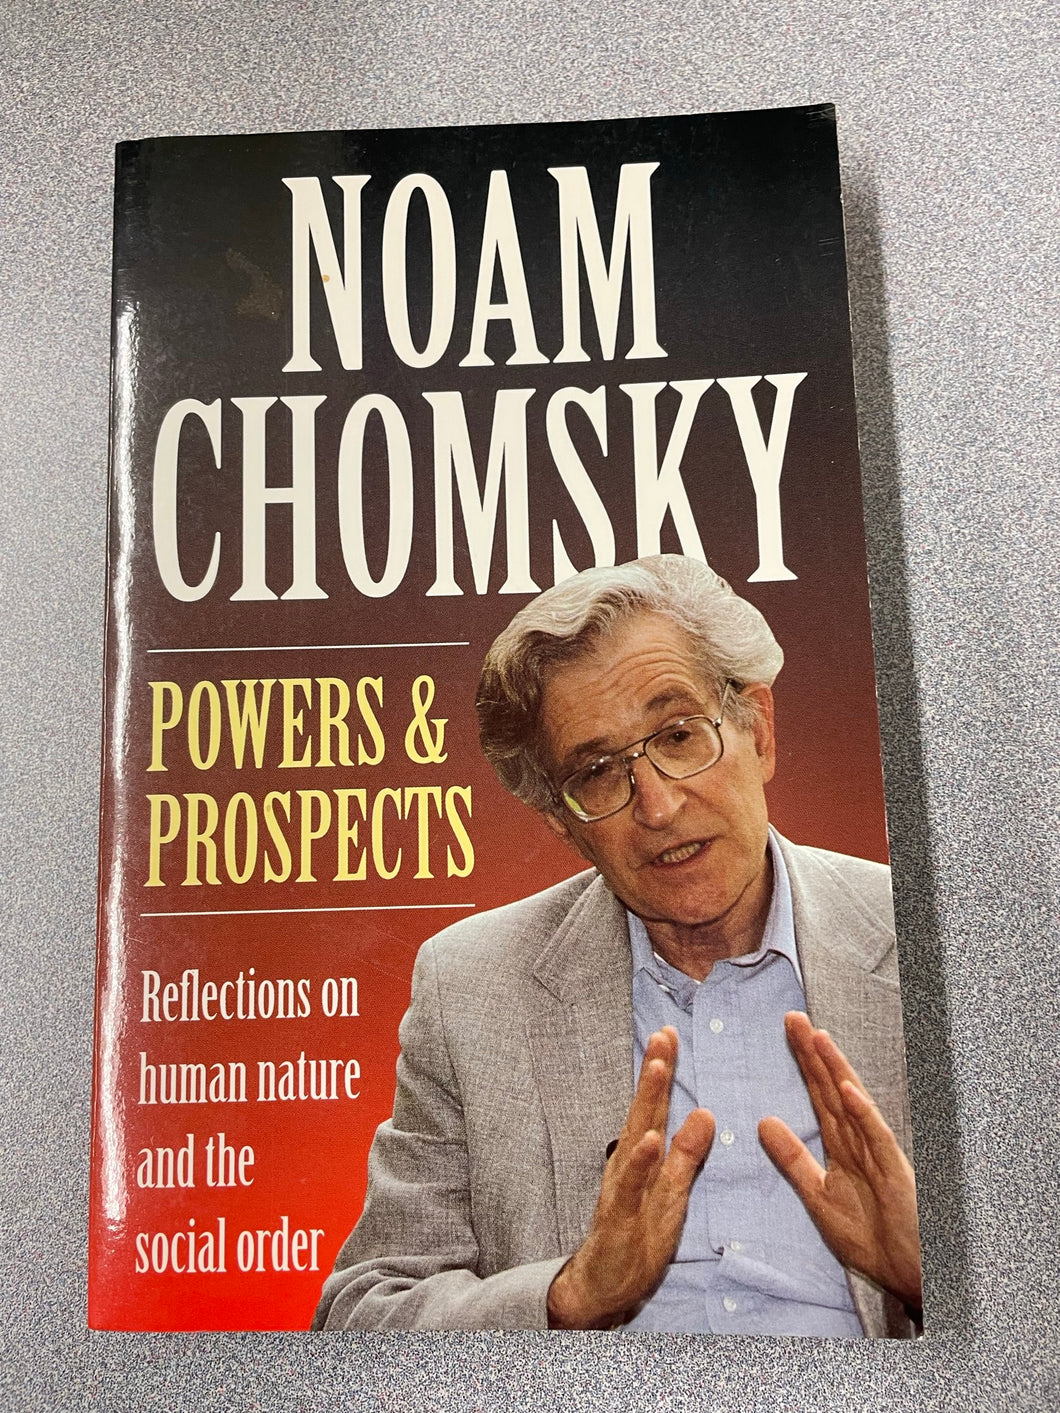 Powers and Prospects: Reflections on Human Nature and the Social Order, Chomsky, Noam [1996] AN 10/22